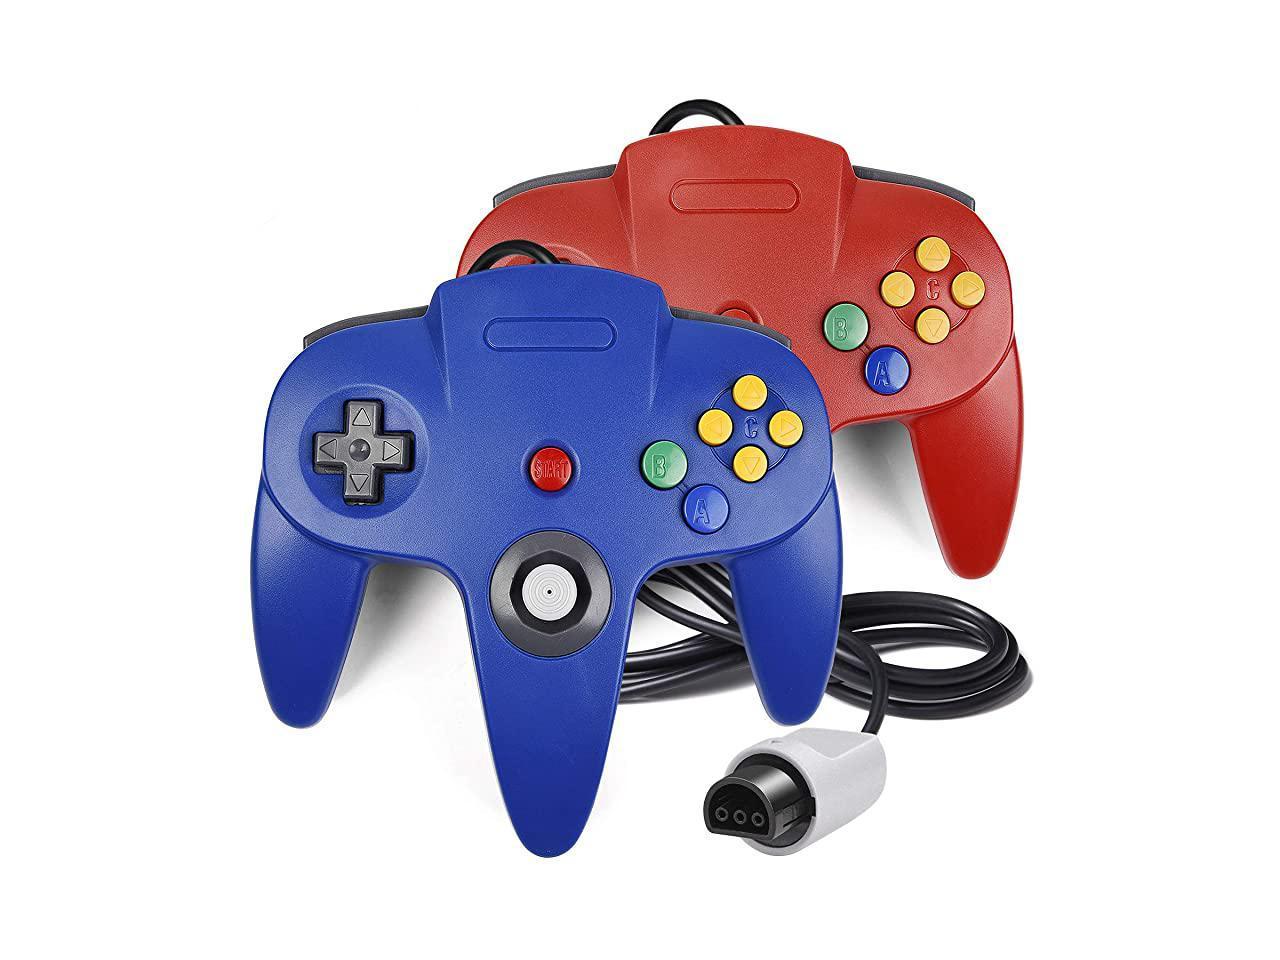 2 Pack N64 Controller iNNEXT Classic Wired N64 64-bit Gamepad Joystick for Ultra 64 Video Game Console